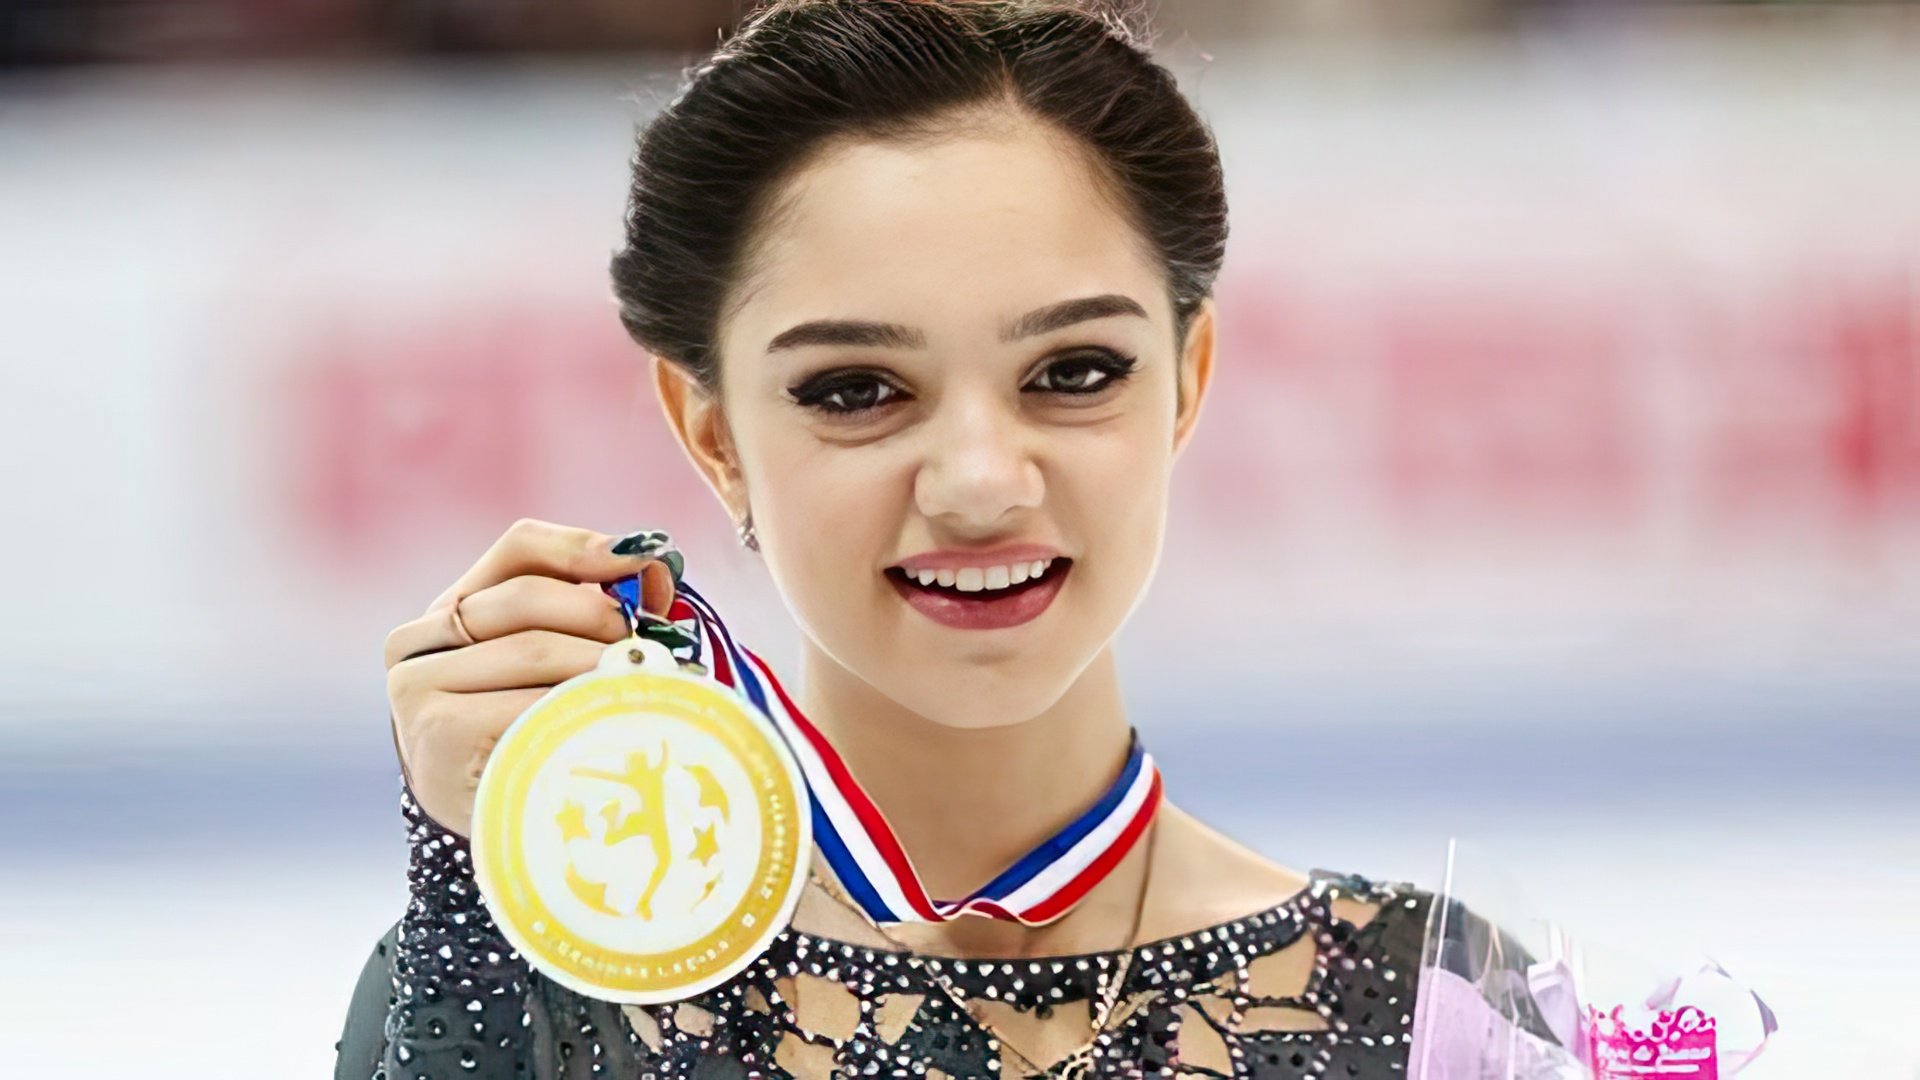 A figure skater Evgenia Medvedeva is the hope of the Russian team